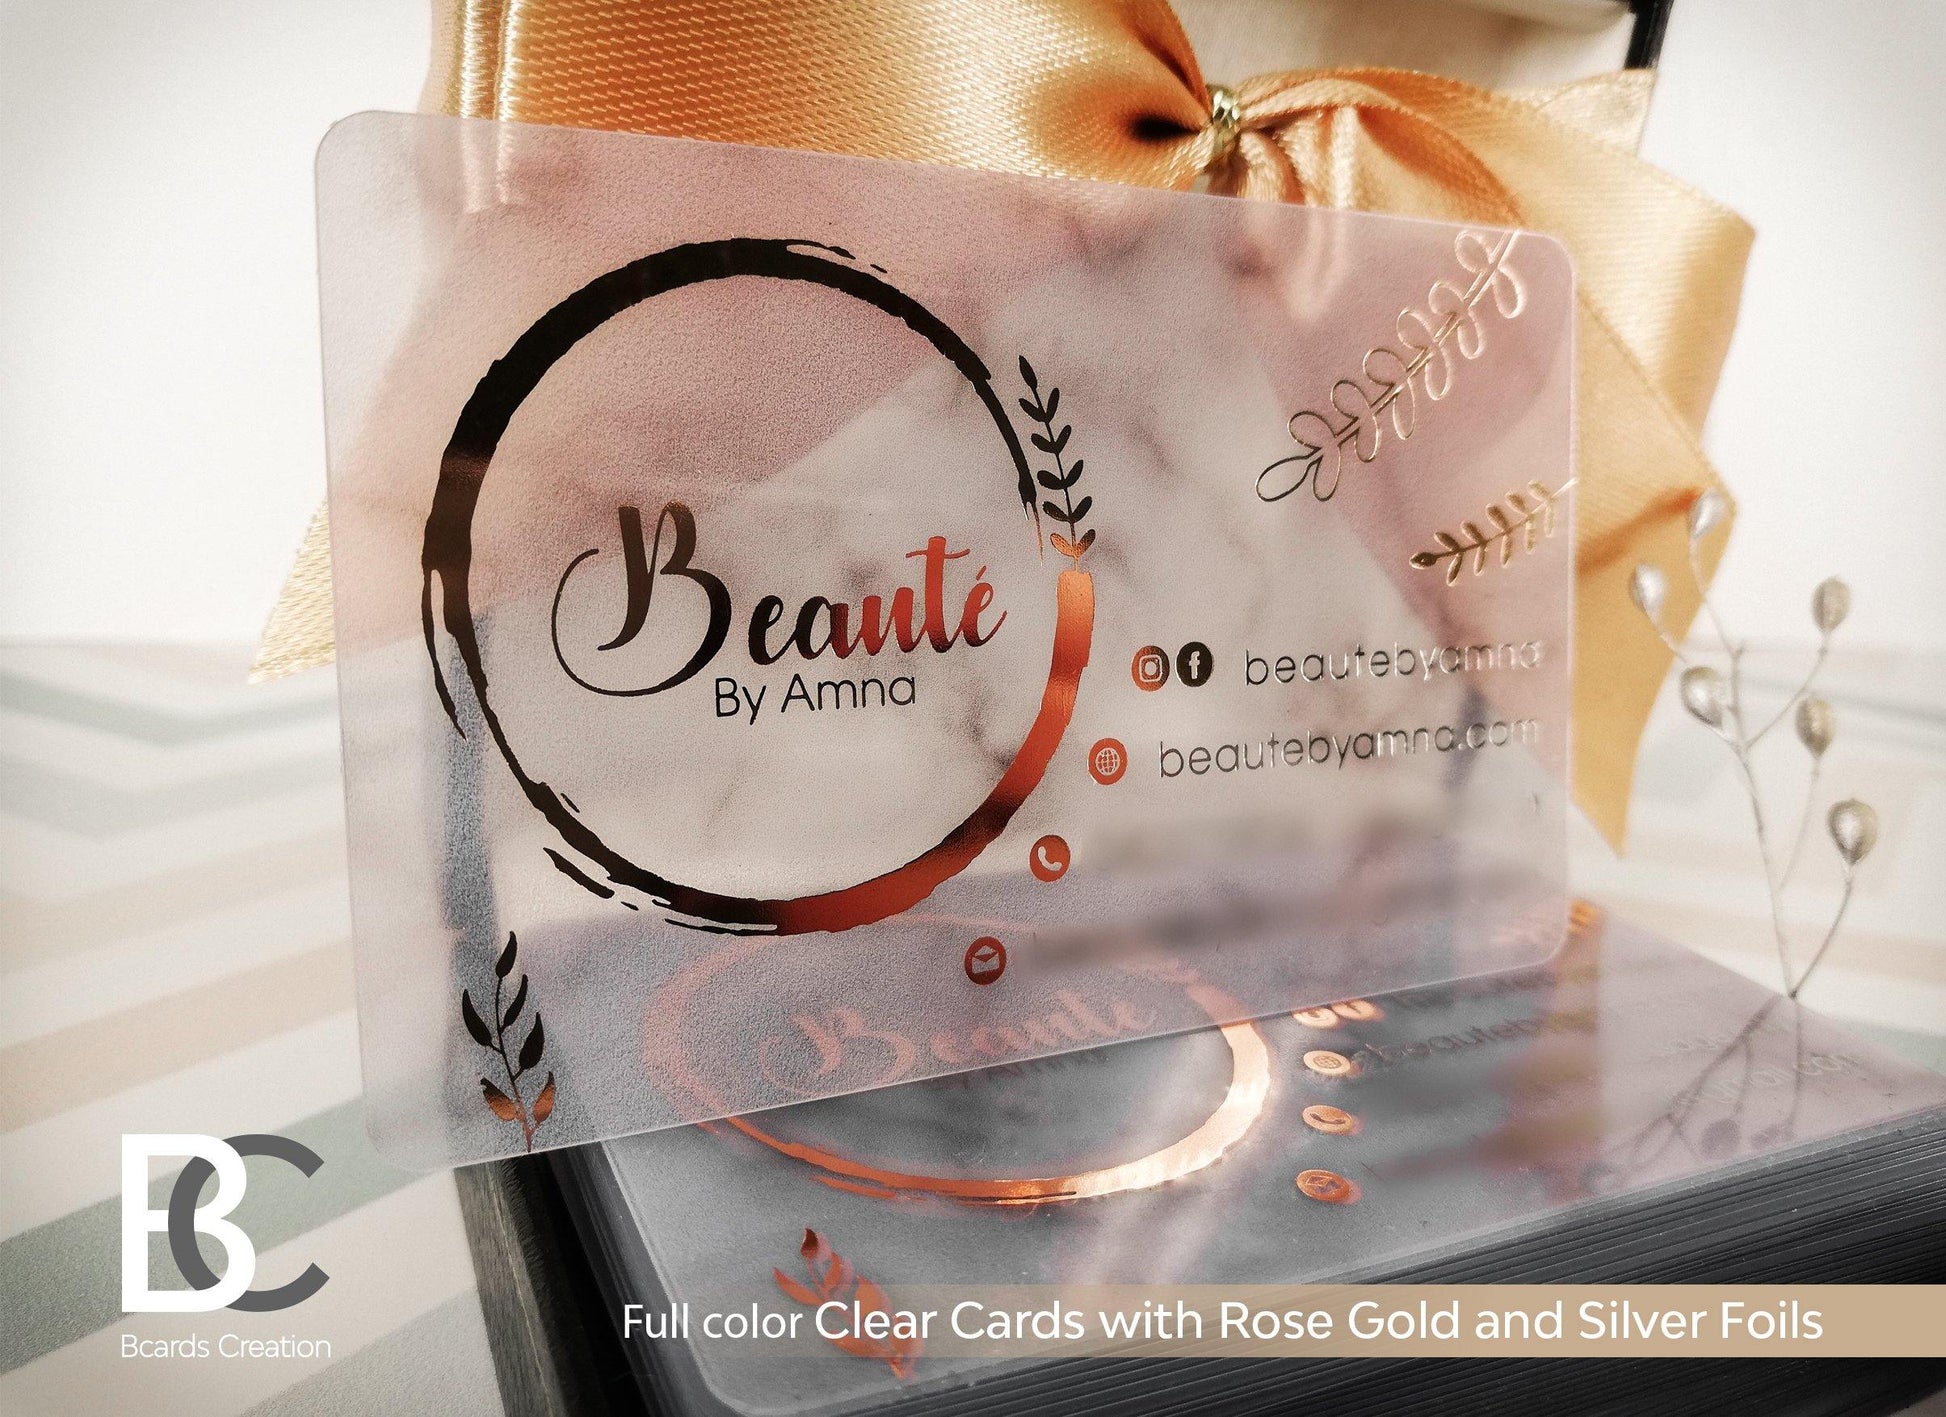 Luxury Business Cards on Clear Transparent Plastic | Foiling with Full Color Printing BcardsCreation